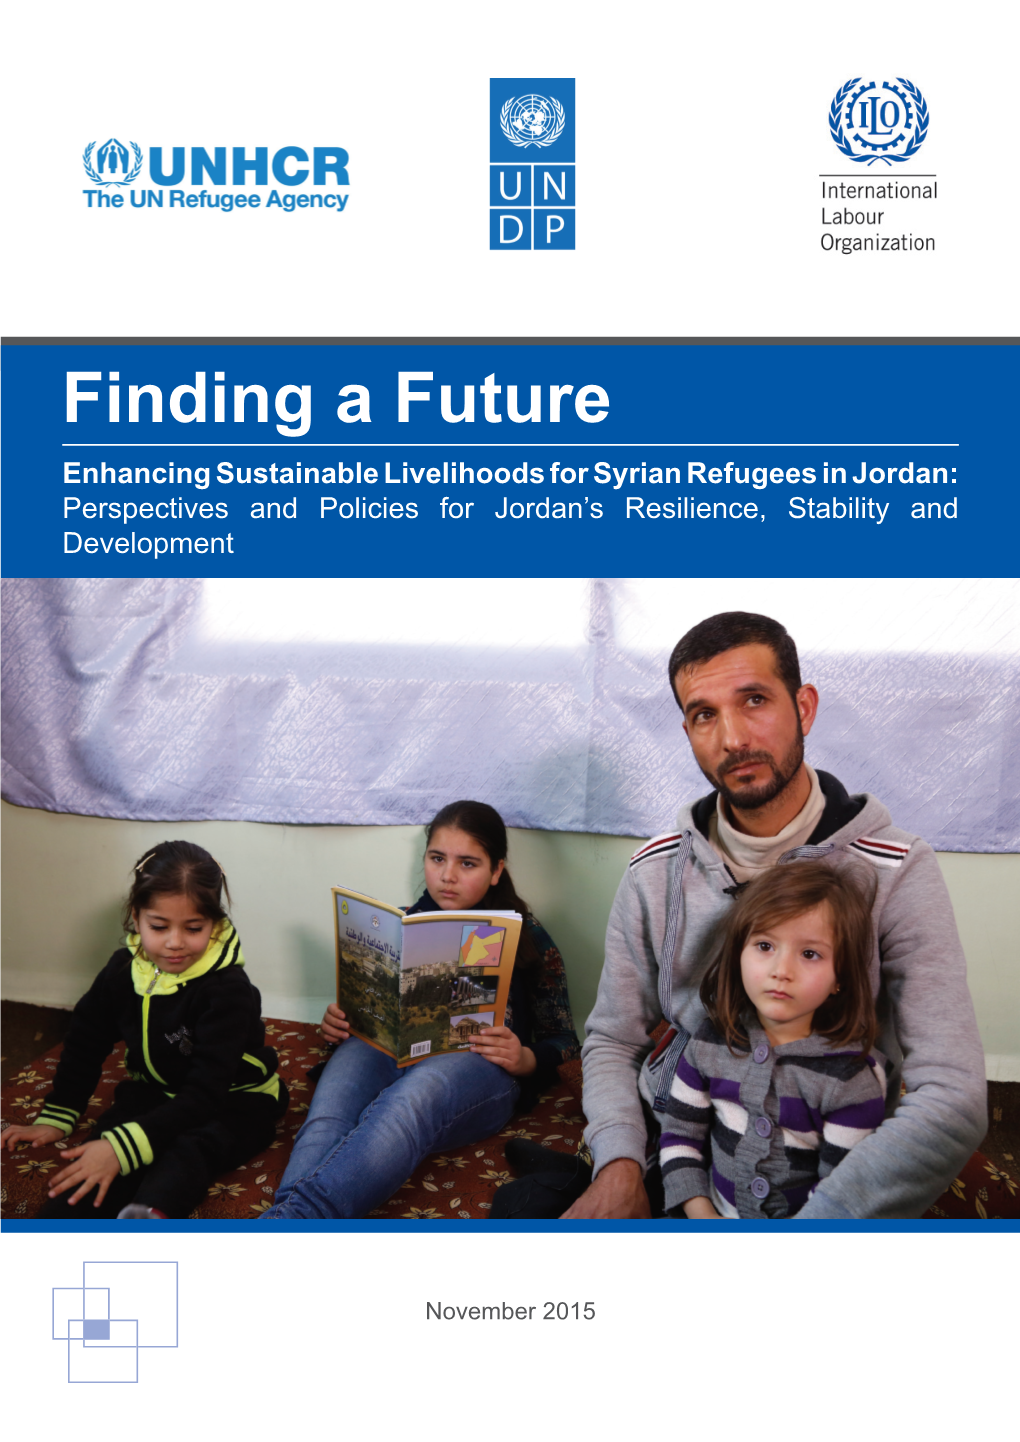 Finding a Future Enhancing Sustainable Livelihoods for Syrian Refugees in Jordan: Perspectives and Policies for Jordan’S Resilience, Stability and Development